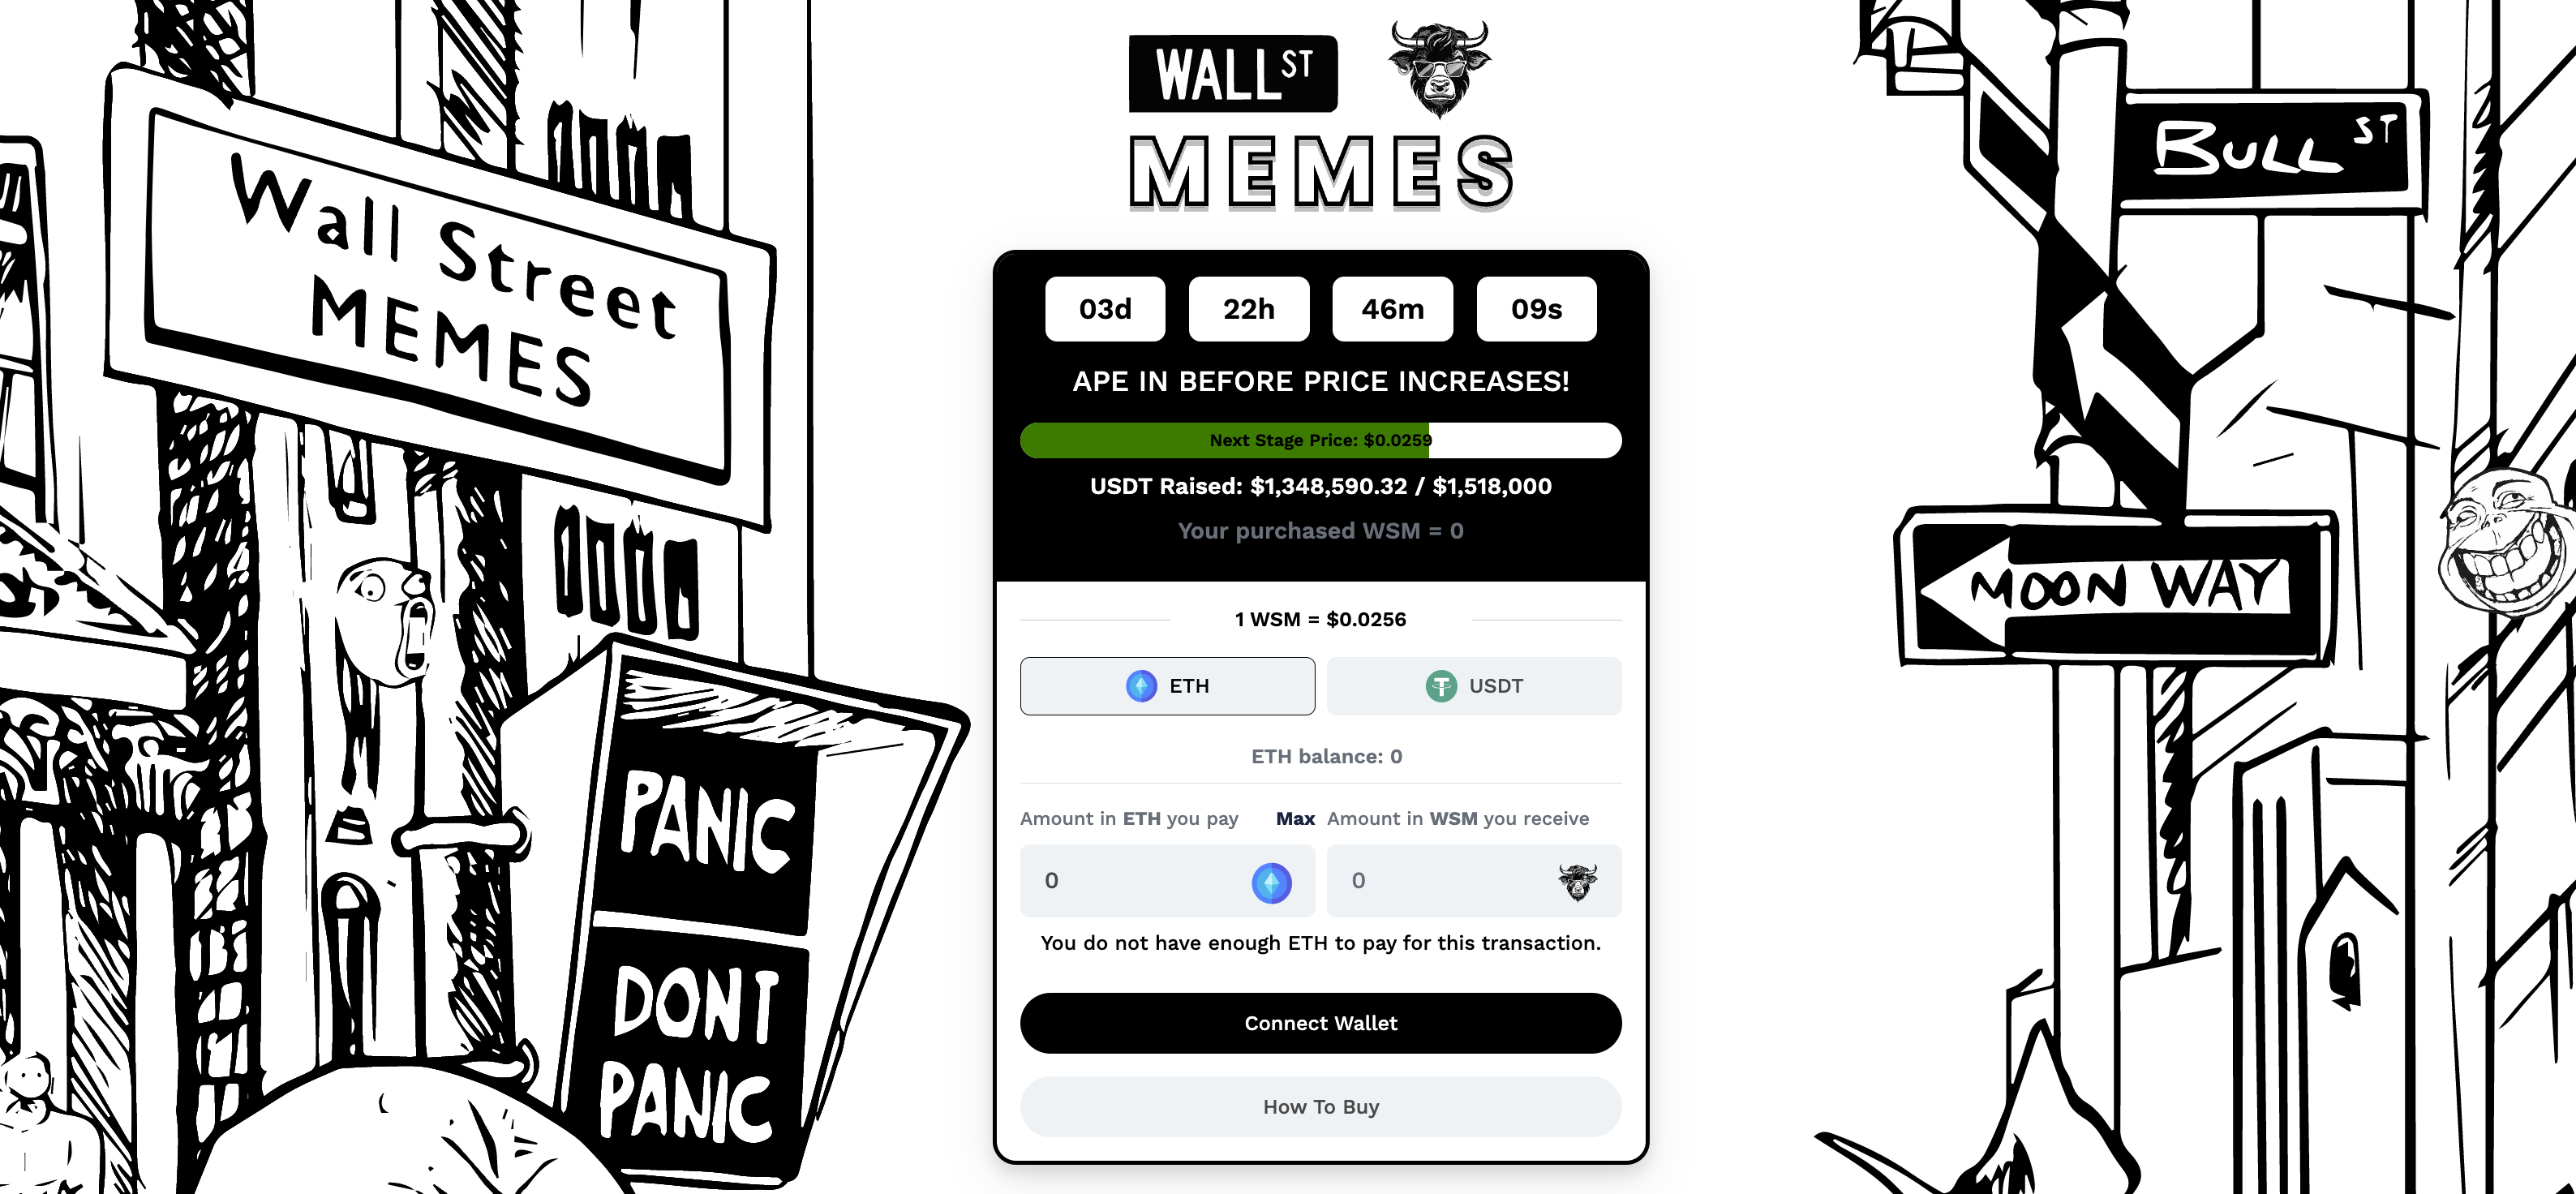 Wall Street Memes Presale Surges Past $1.3 Million as Investors Rush to Partake in Hottest Meme Coin Presale in Years